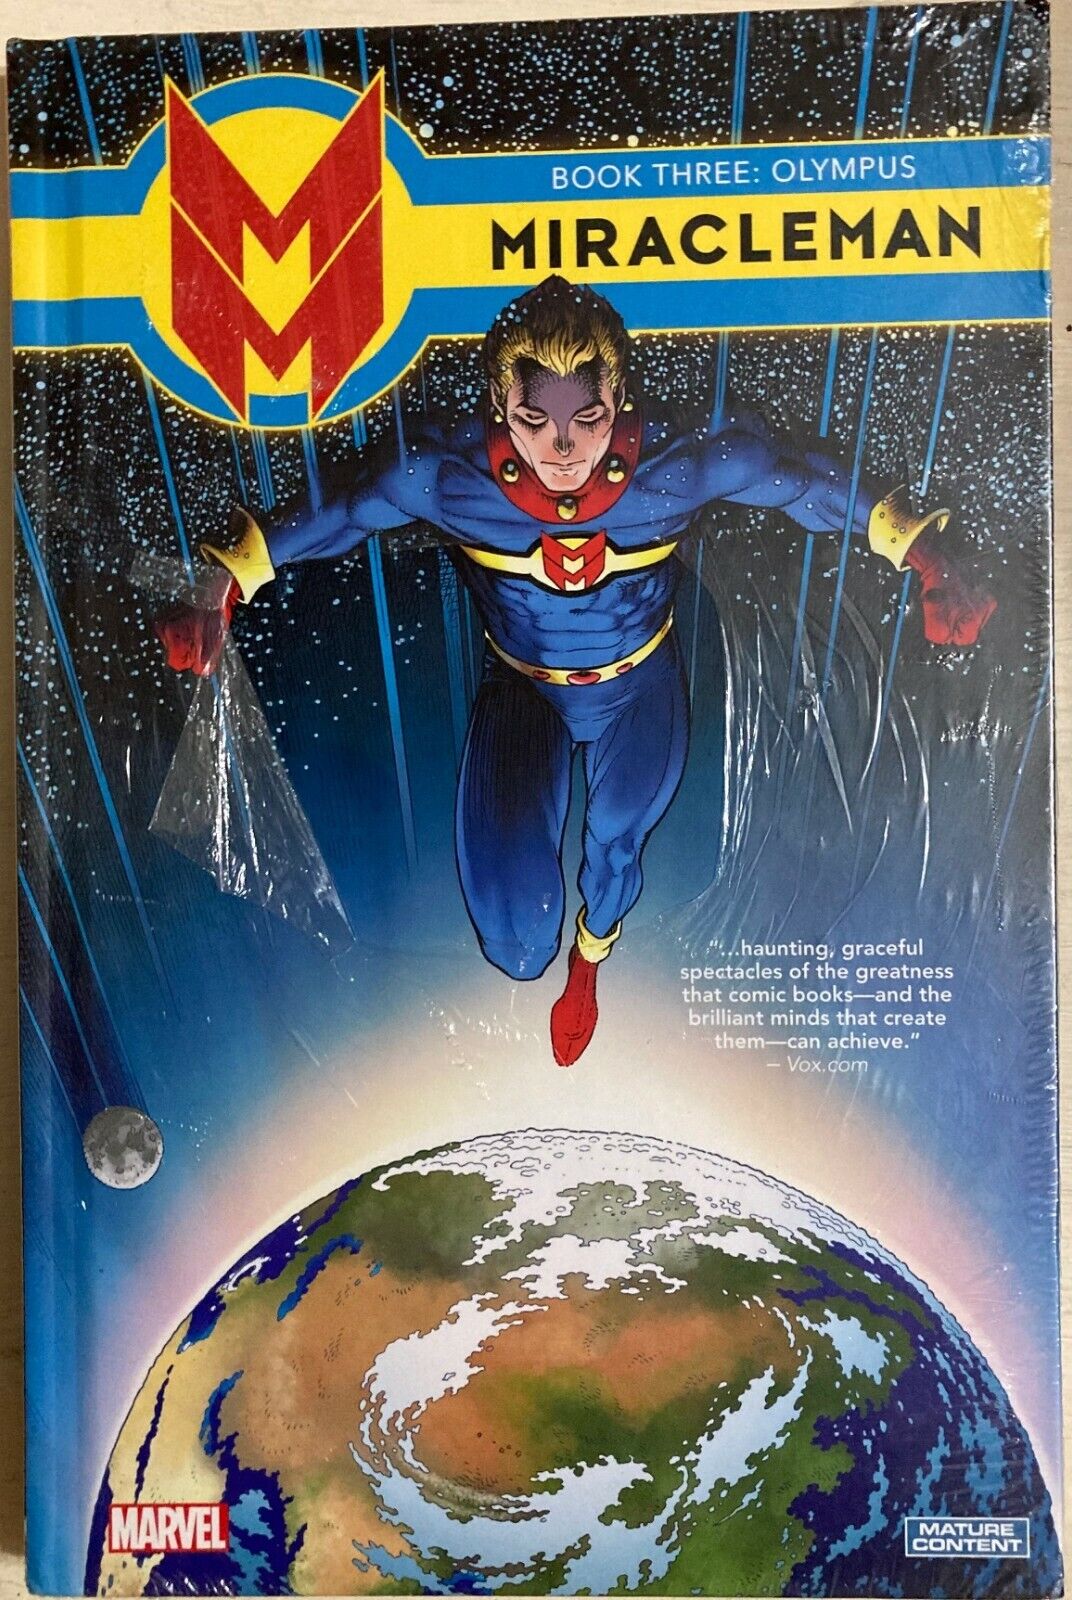 Miracleman Book 3 : Olympus by Grant Morrison (2015, Hardcover) Marvel Rare